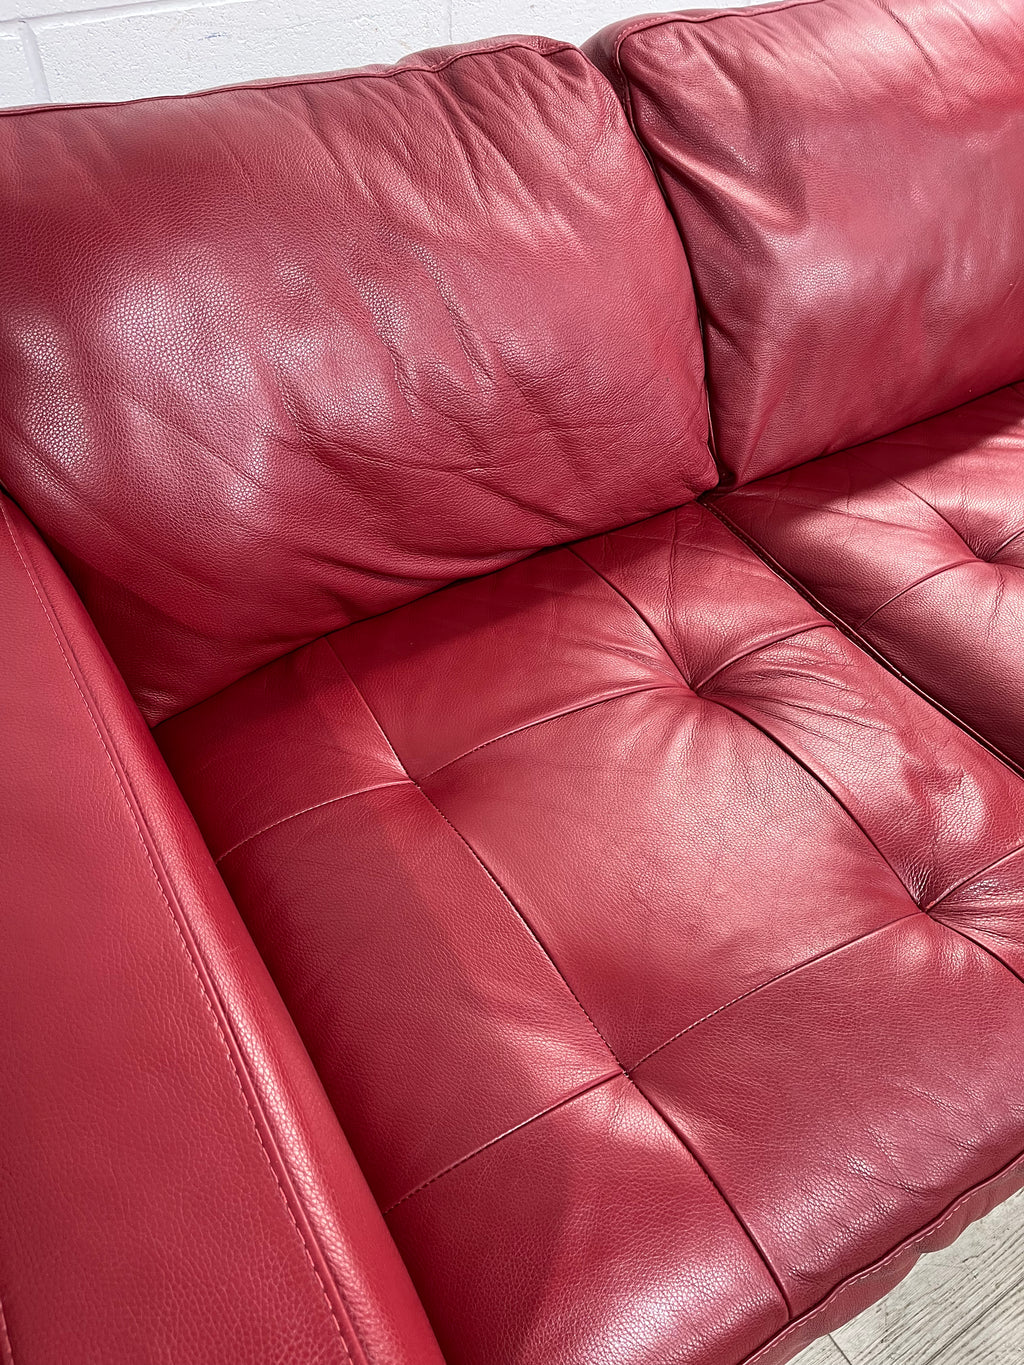 Red Leather 3 Seat Sofa